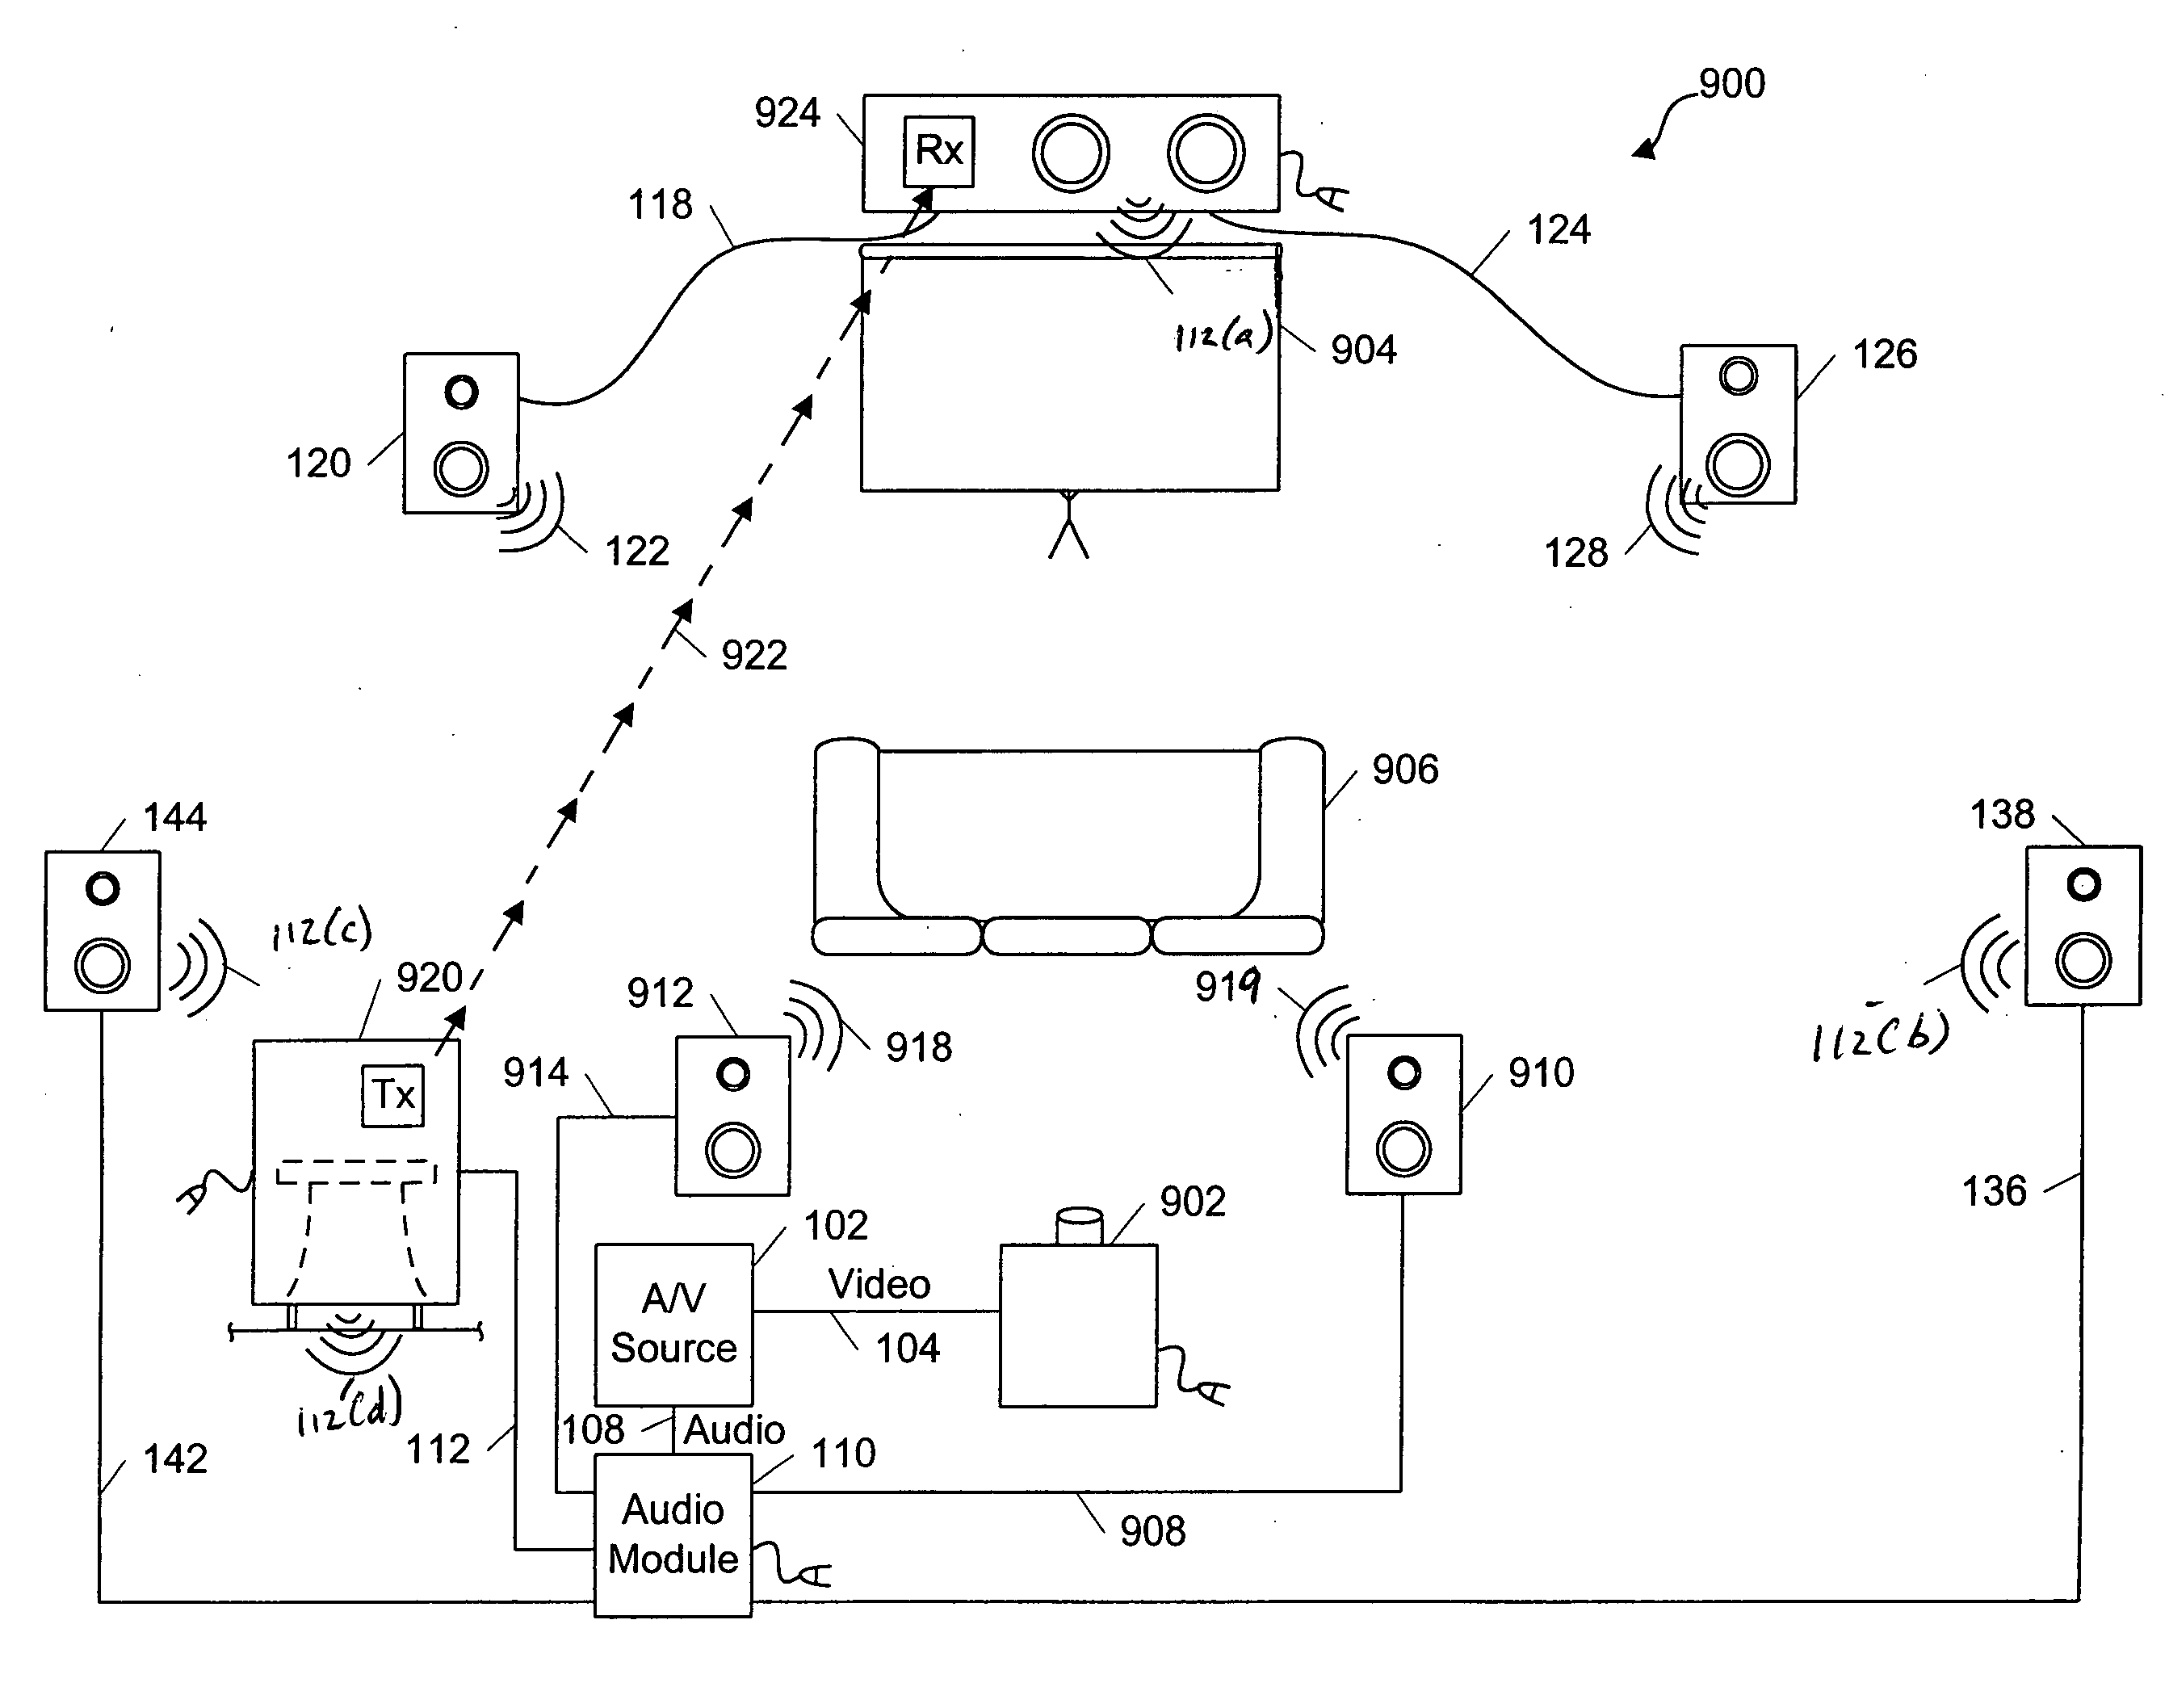 Wireless and wired speaker hub for a home theater system